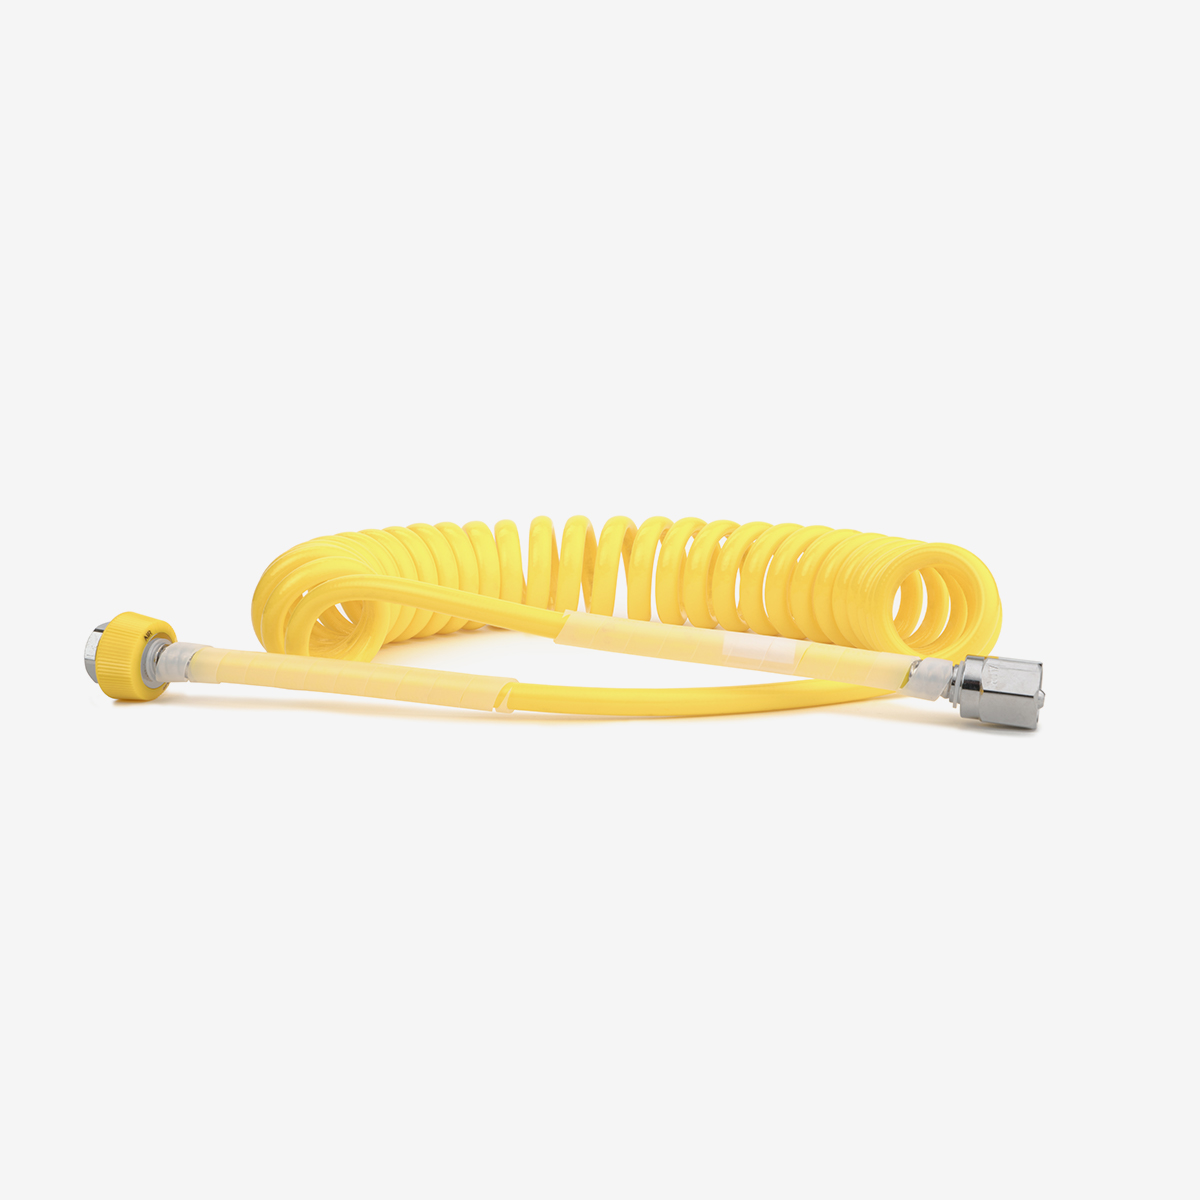 Yellow coiled medical air hose on white background